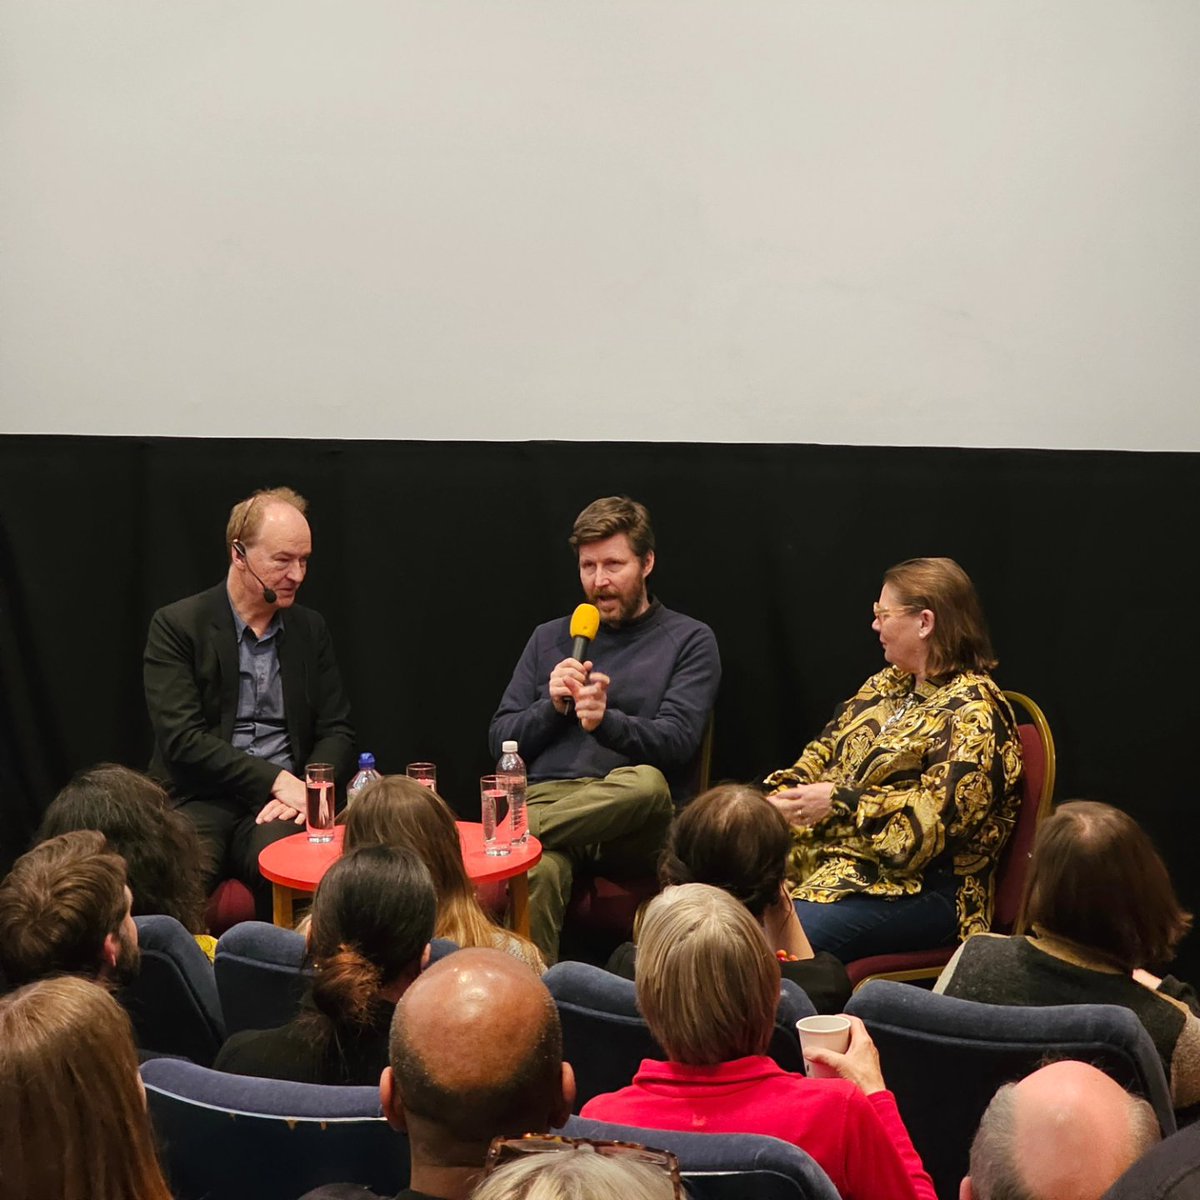 Full house for tonight's special Q&A screening of #AllofUsStrangers with director Andrew Haigh, film critic @PeterBradshaw1, and our patron Joanna Scanlan 🎬